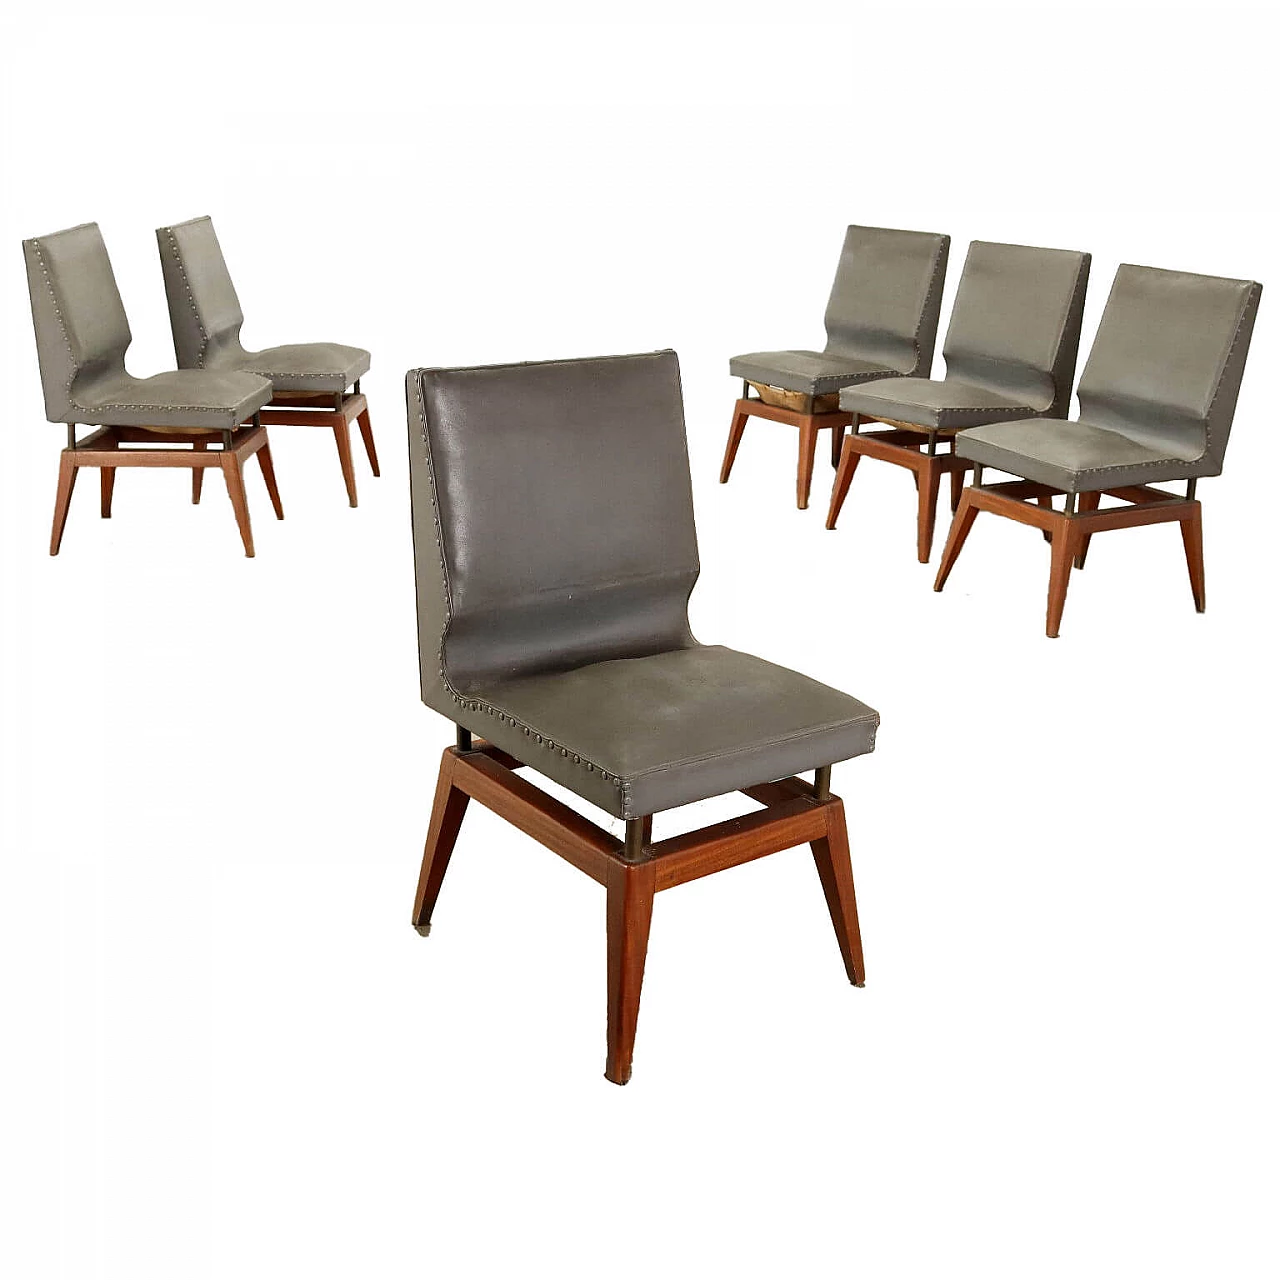 6 Argentine chairs in mahogany, brass and gray skai, 1950s 1